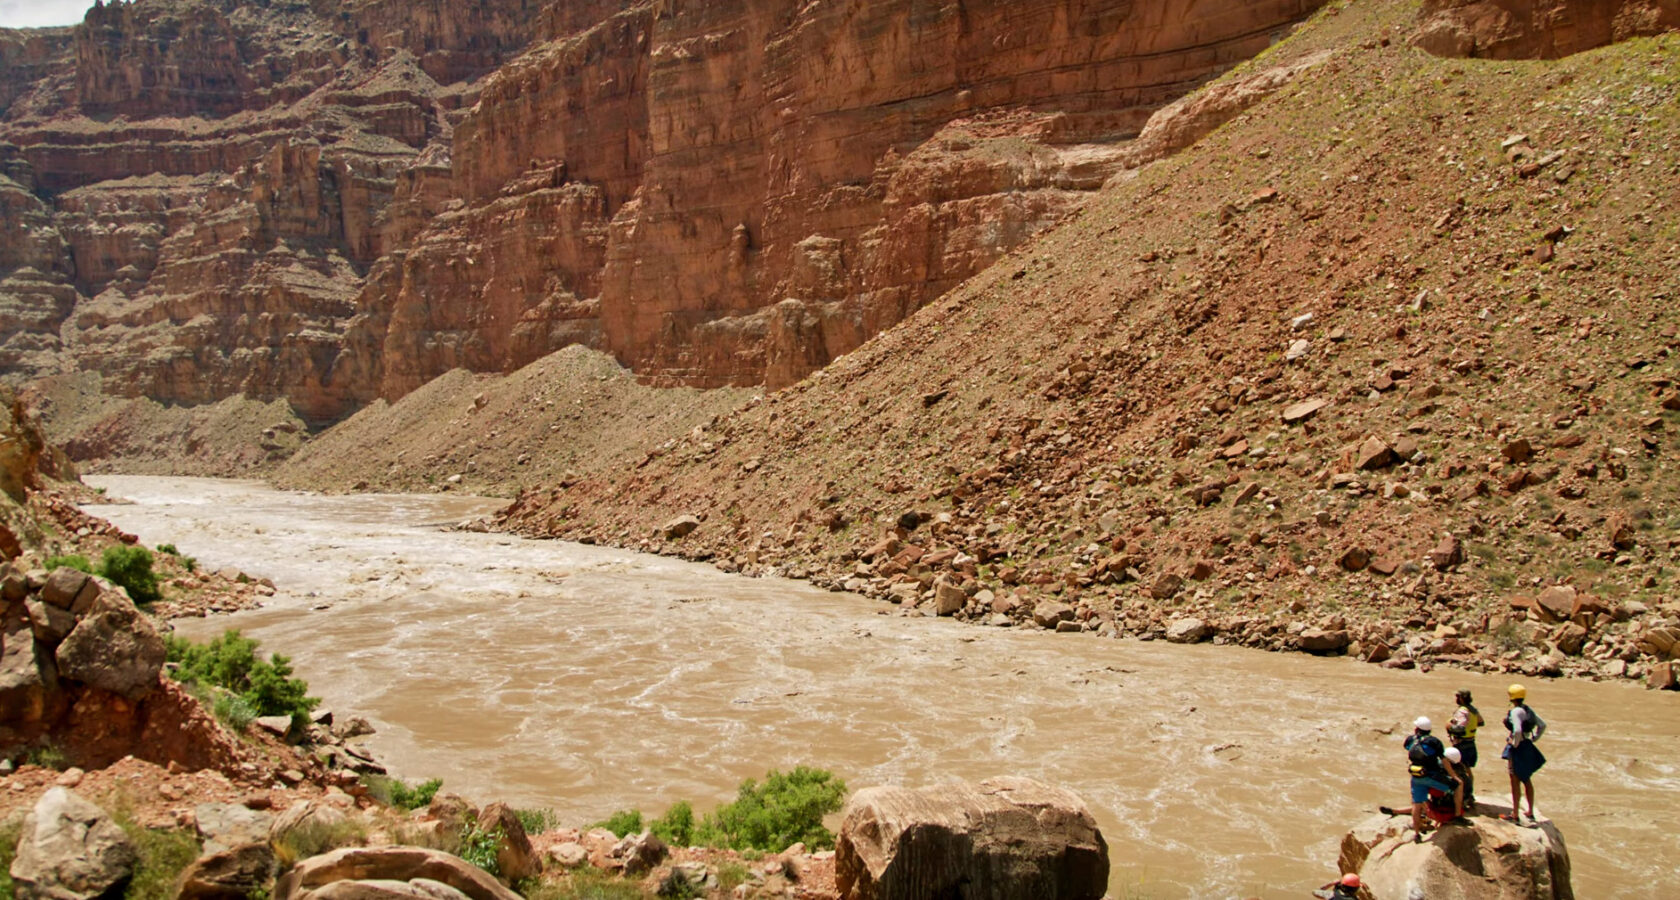 A group of river guides scouting the Big Drops in Cataract Canyon